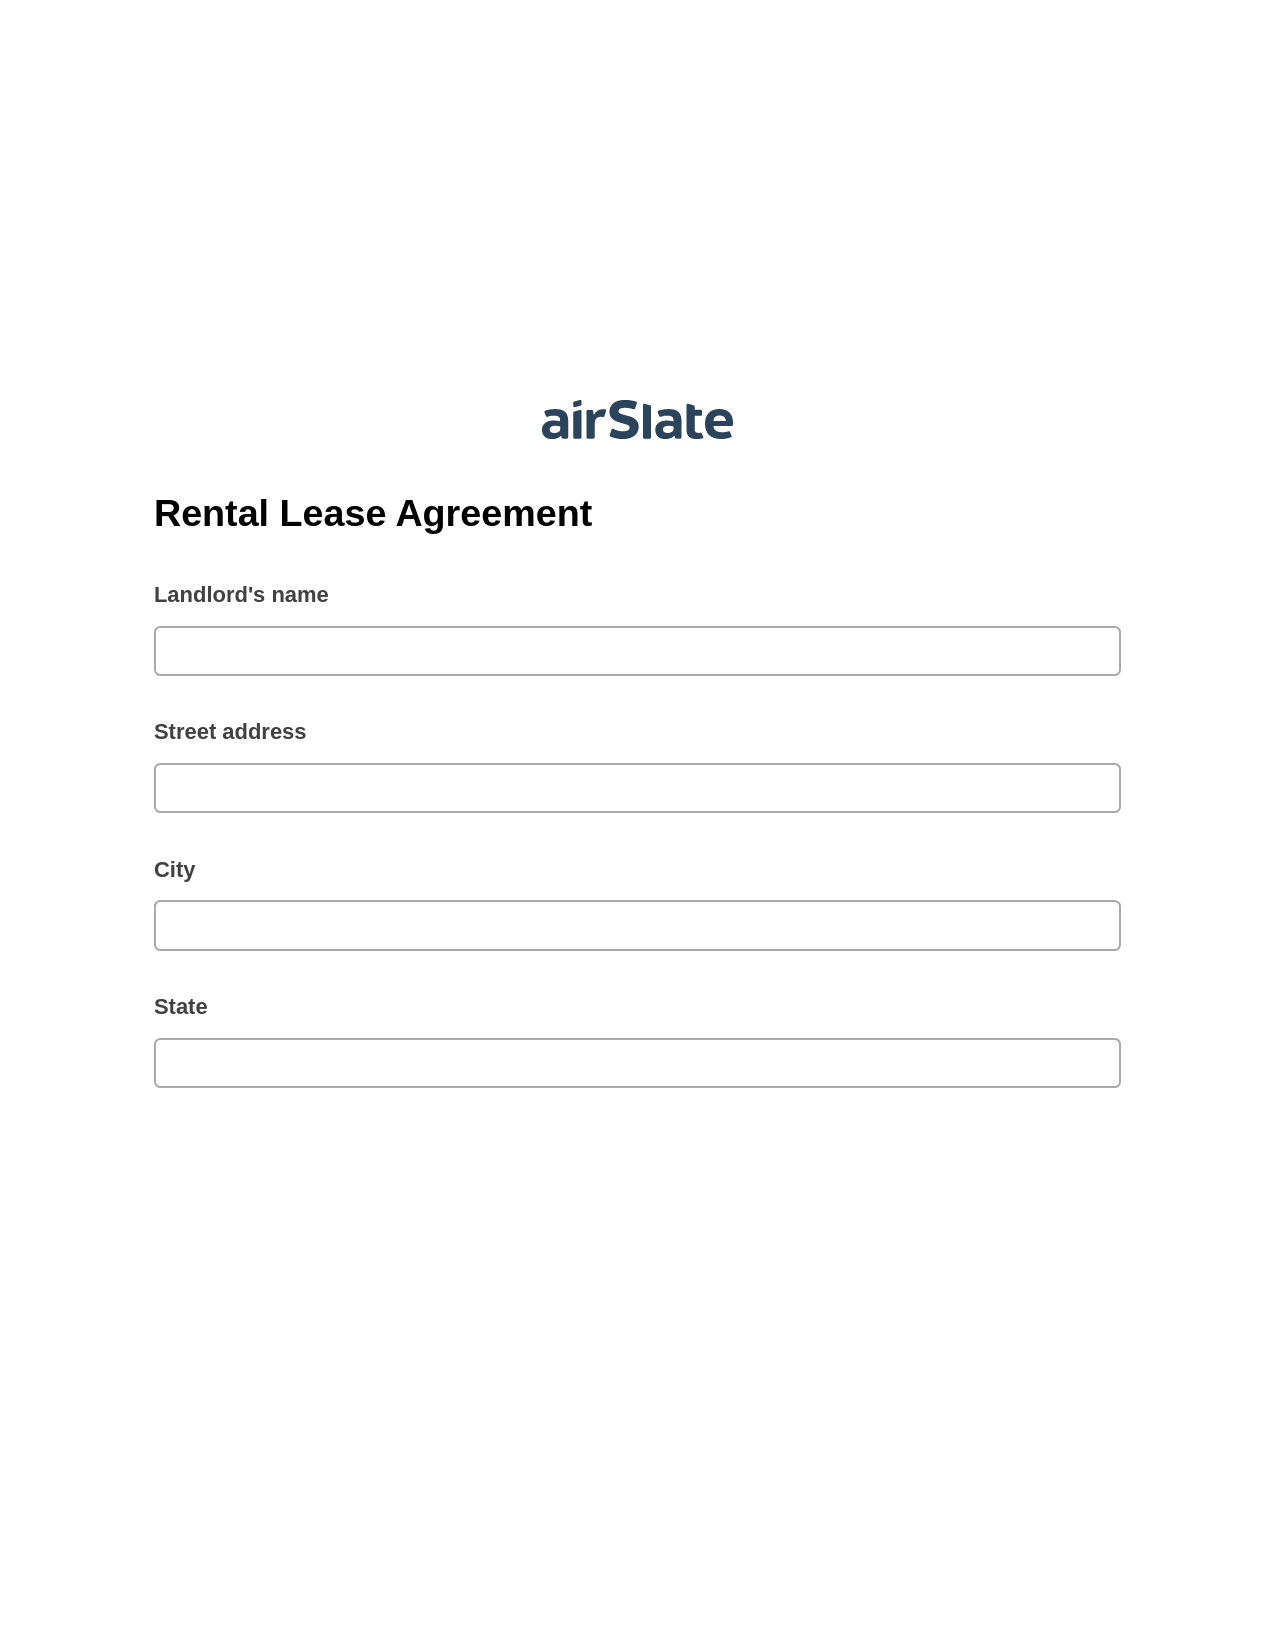 Rental Lease Agreement Pre-fill from Excel Spreadsheet Dropdown Options Bot, Update NetSuite Records Bot, Export to Google Sheet Bot